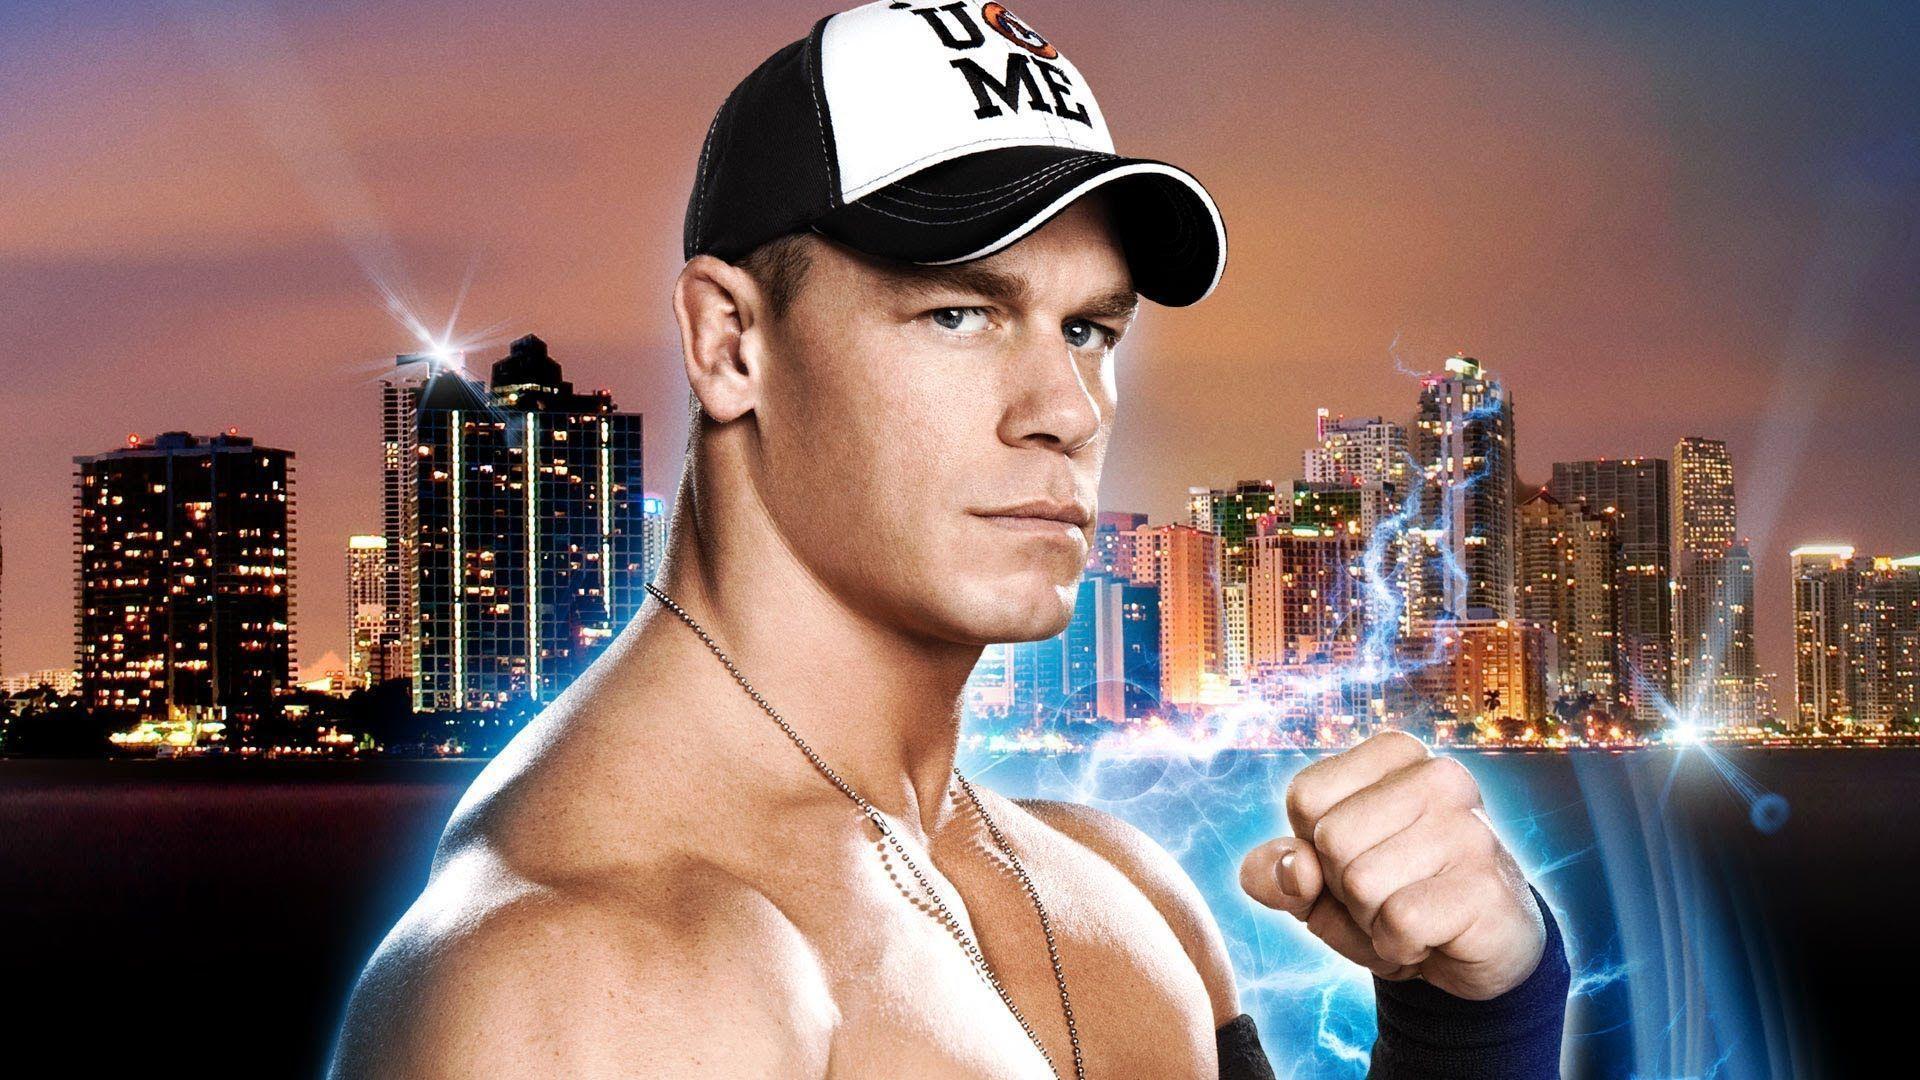 Free download WWE John Cena Mobile Wallpapers 2015 [1920x1080] for your